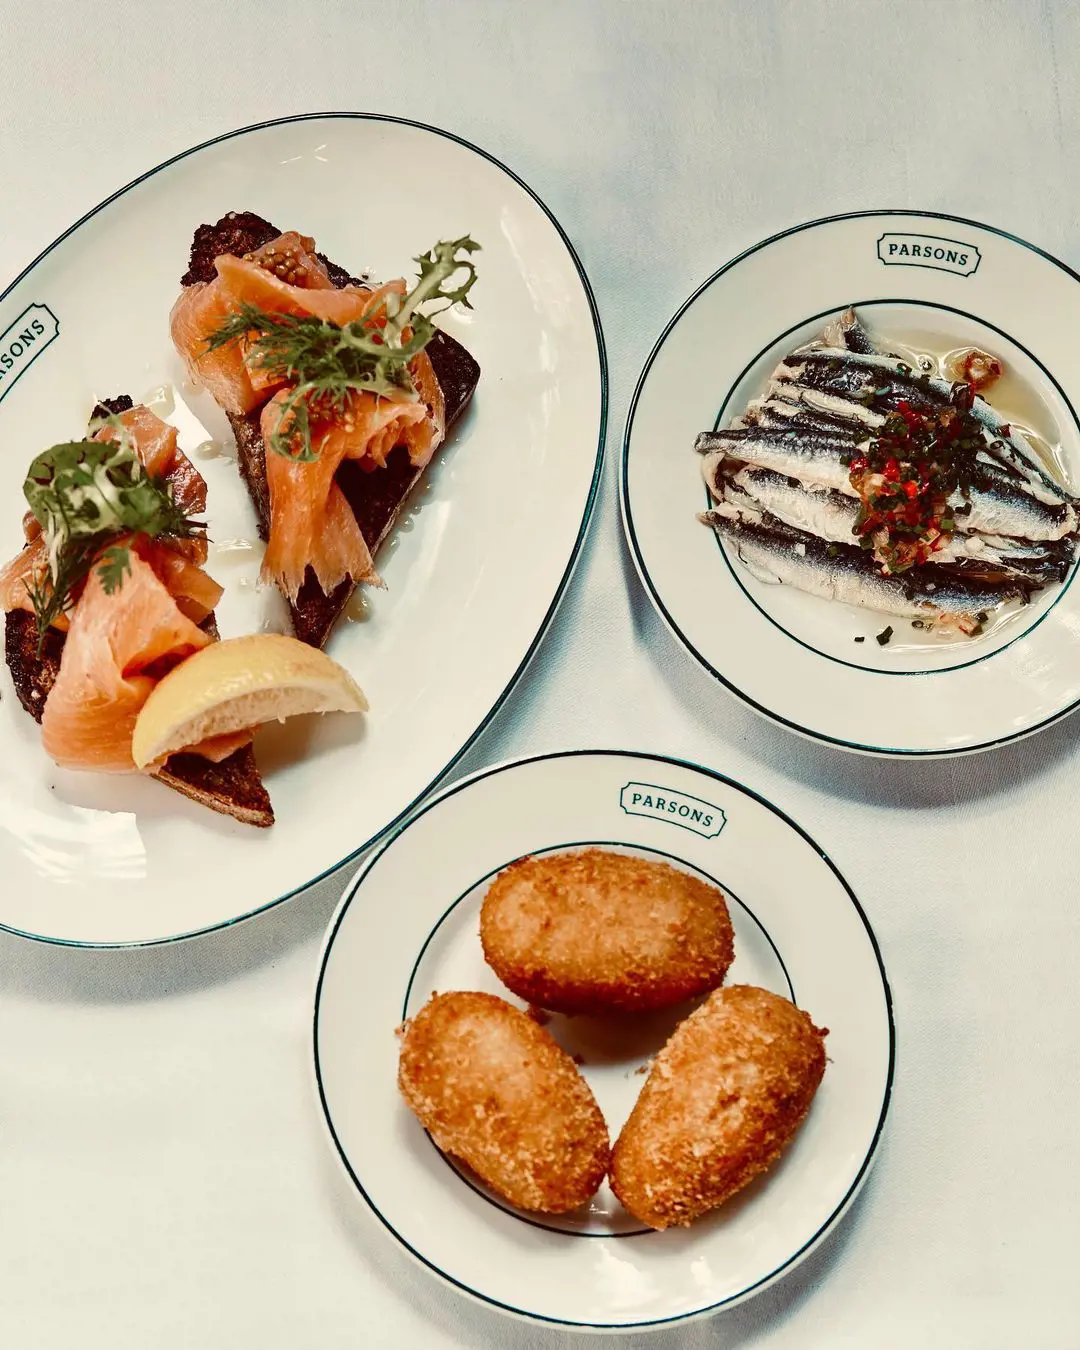 Featuring Severn & Wye smoked salmon on Guinness bread, Marinated Anchovies and Potted Shrimp Croquettes